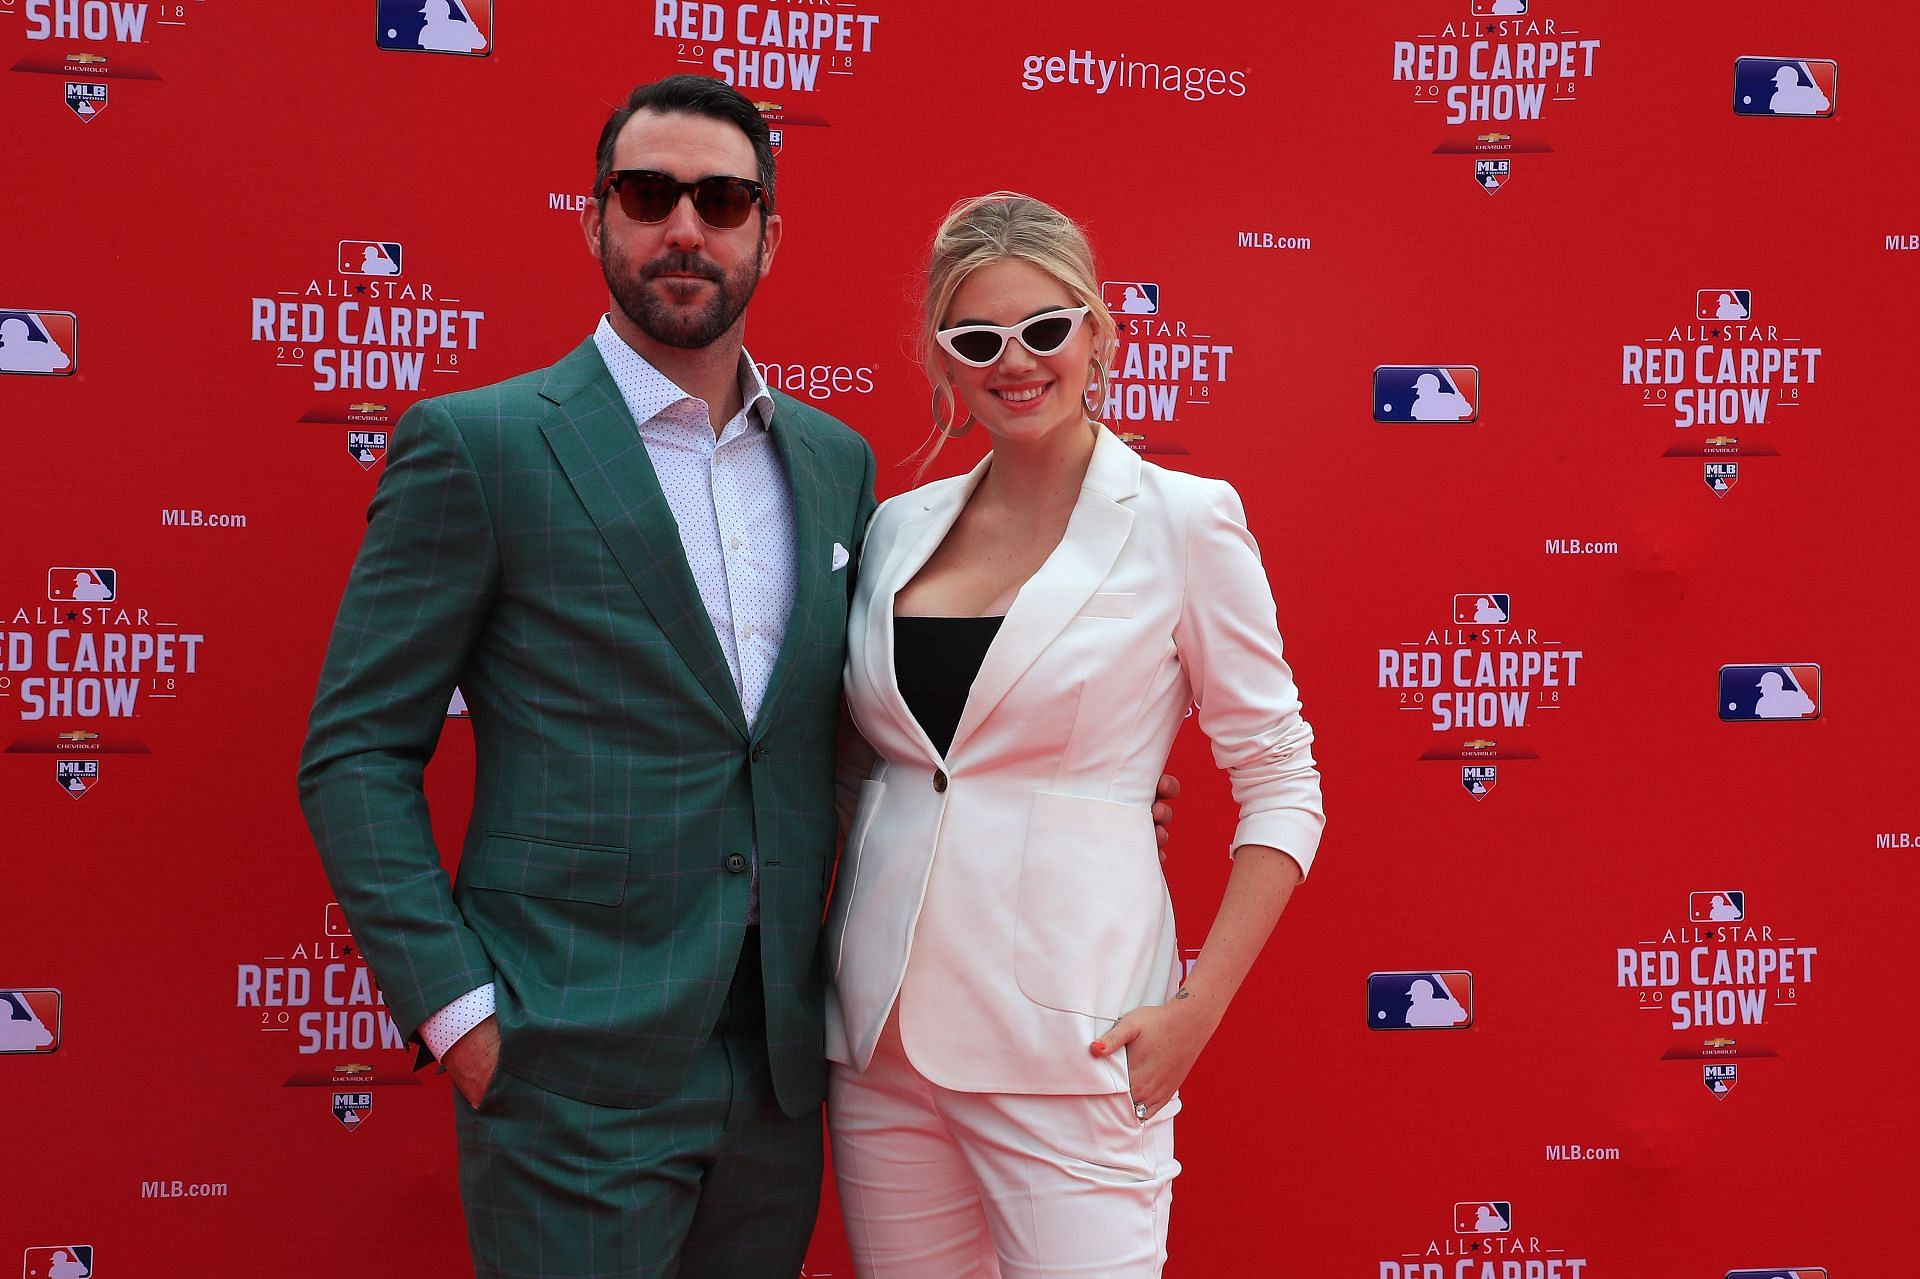 Kate Upton has a custom jacket to back Astros in the playoffs